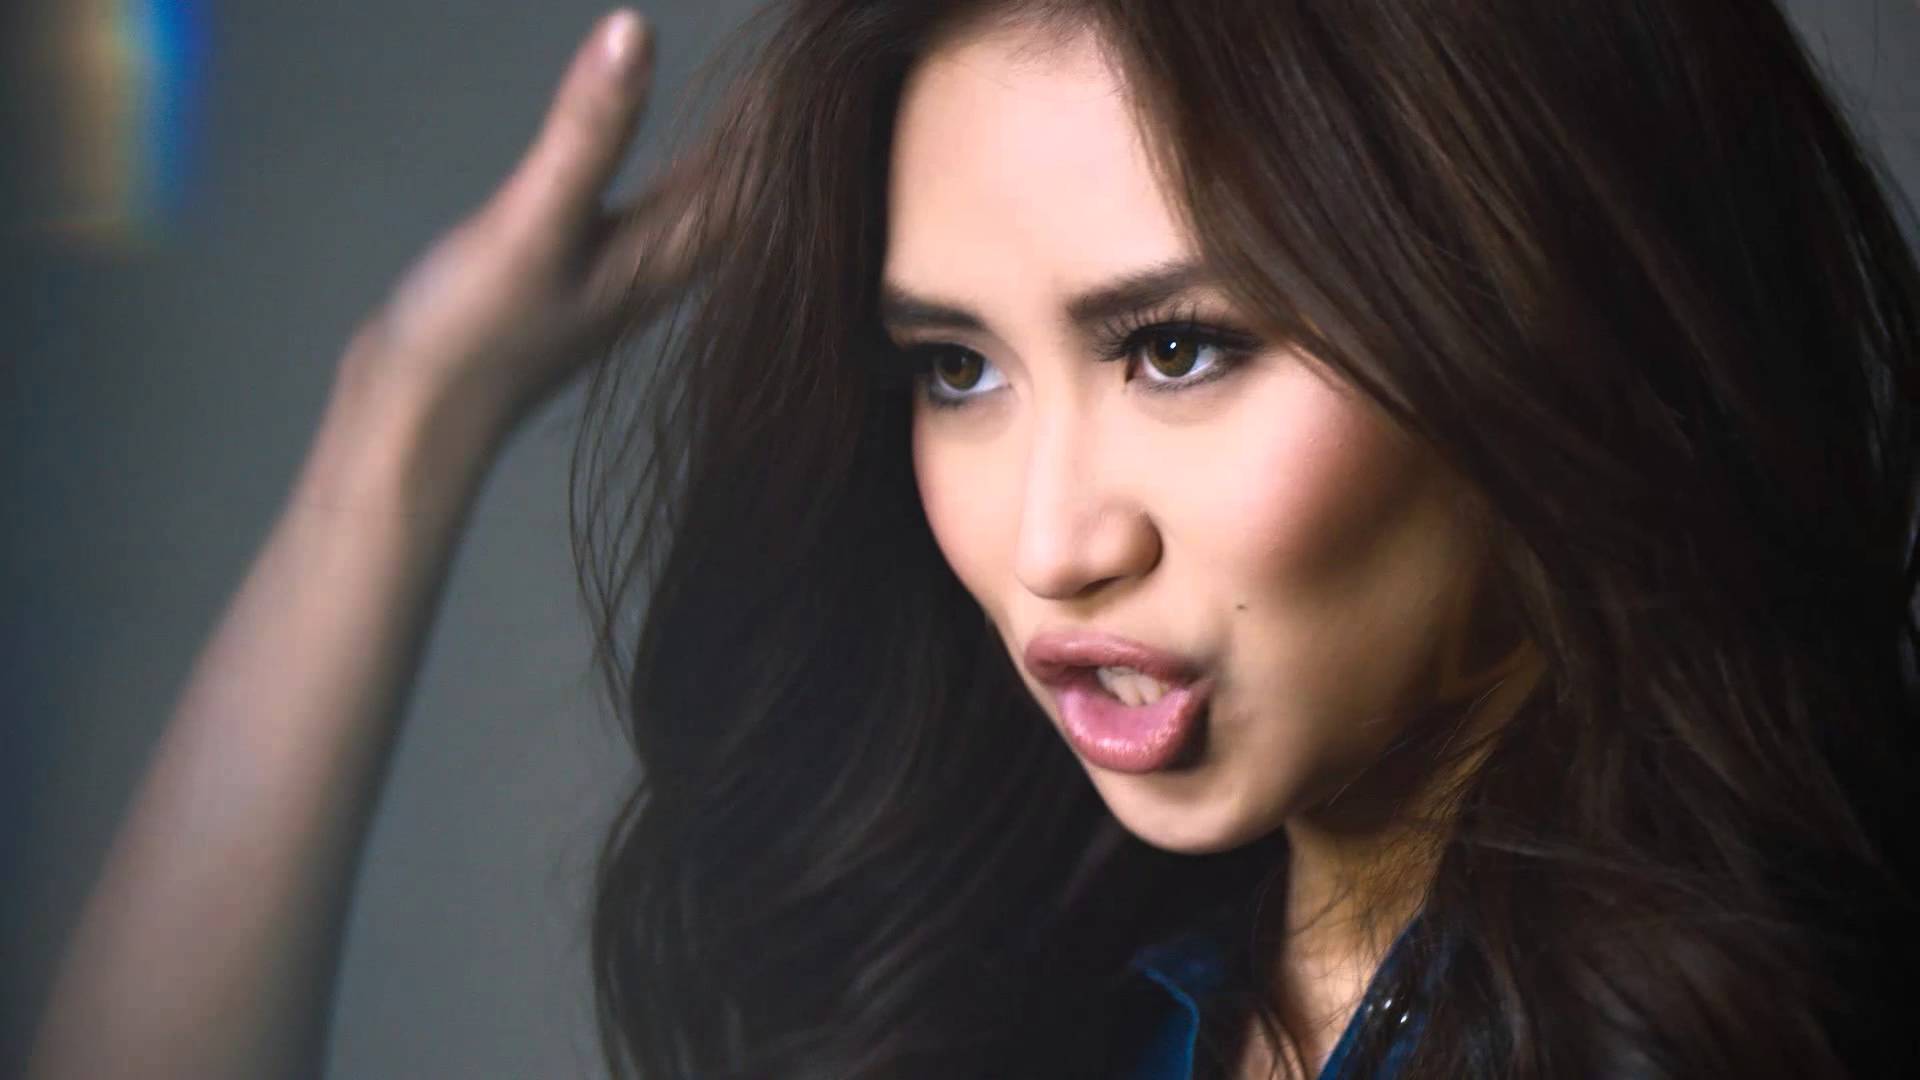 Sarah Geronimo gets “The Look” with Jag Jeans